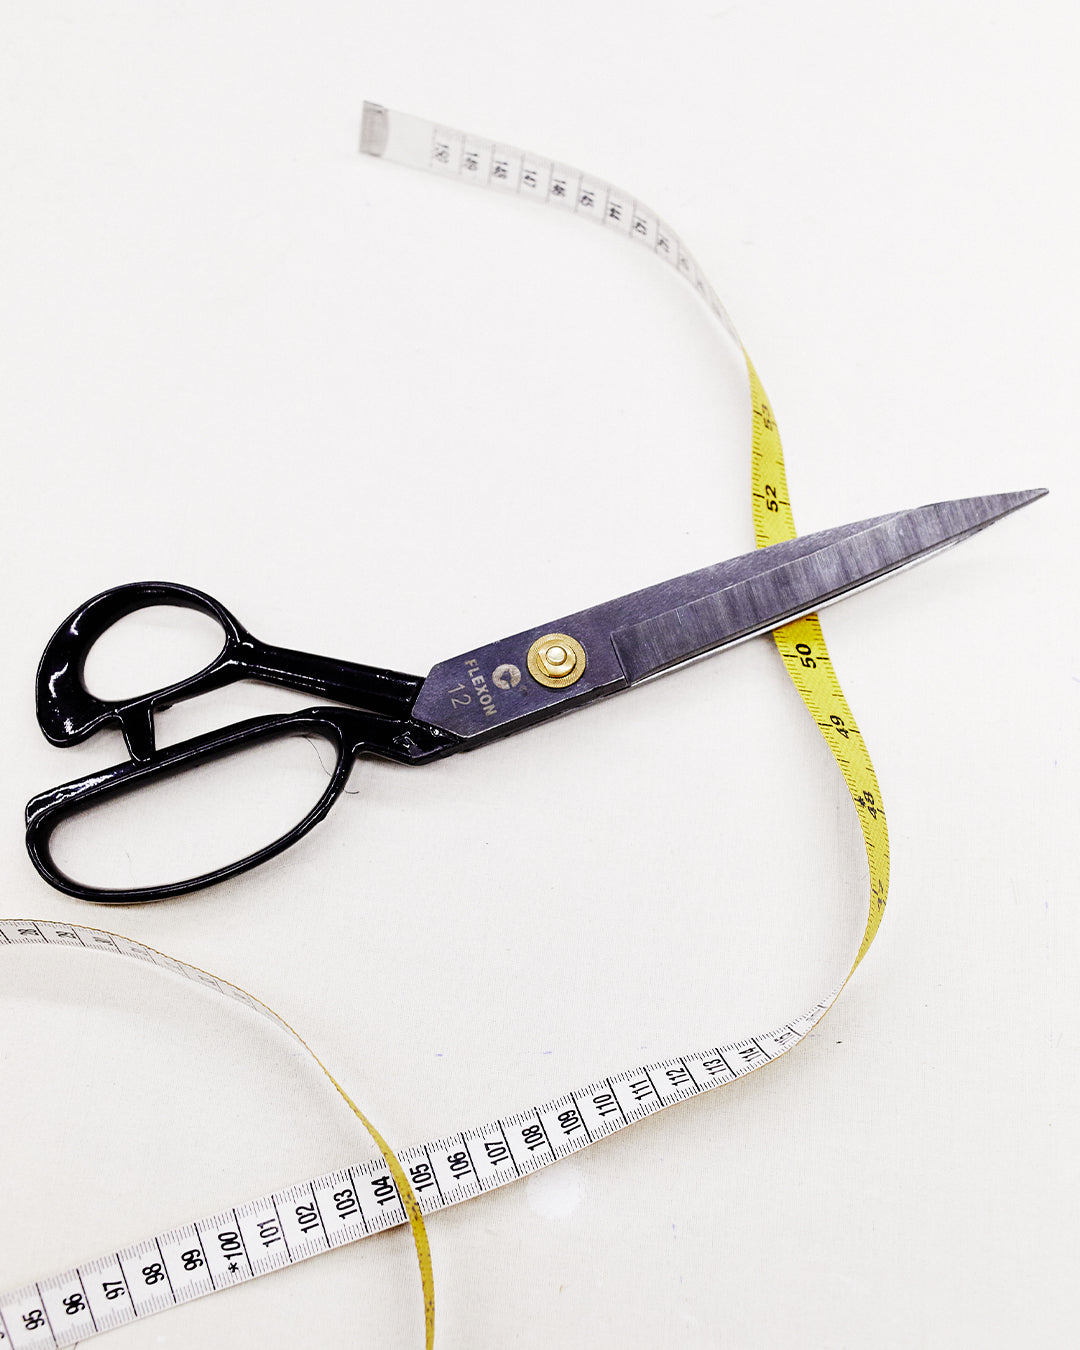 Scissors and tape measure used in Varana’s made-to-measure service 